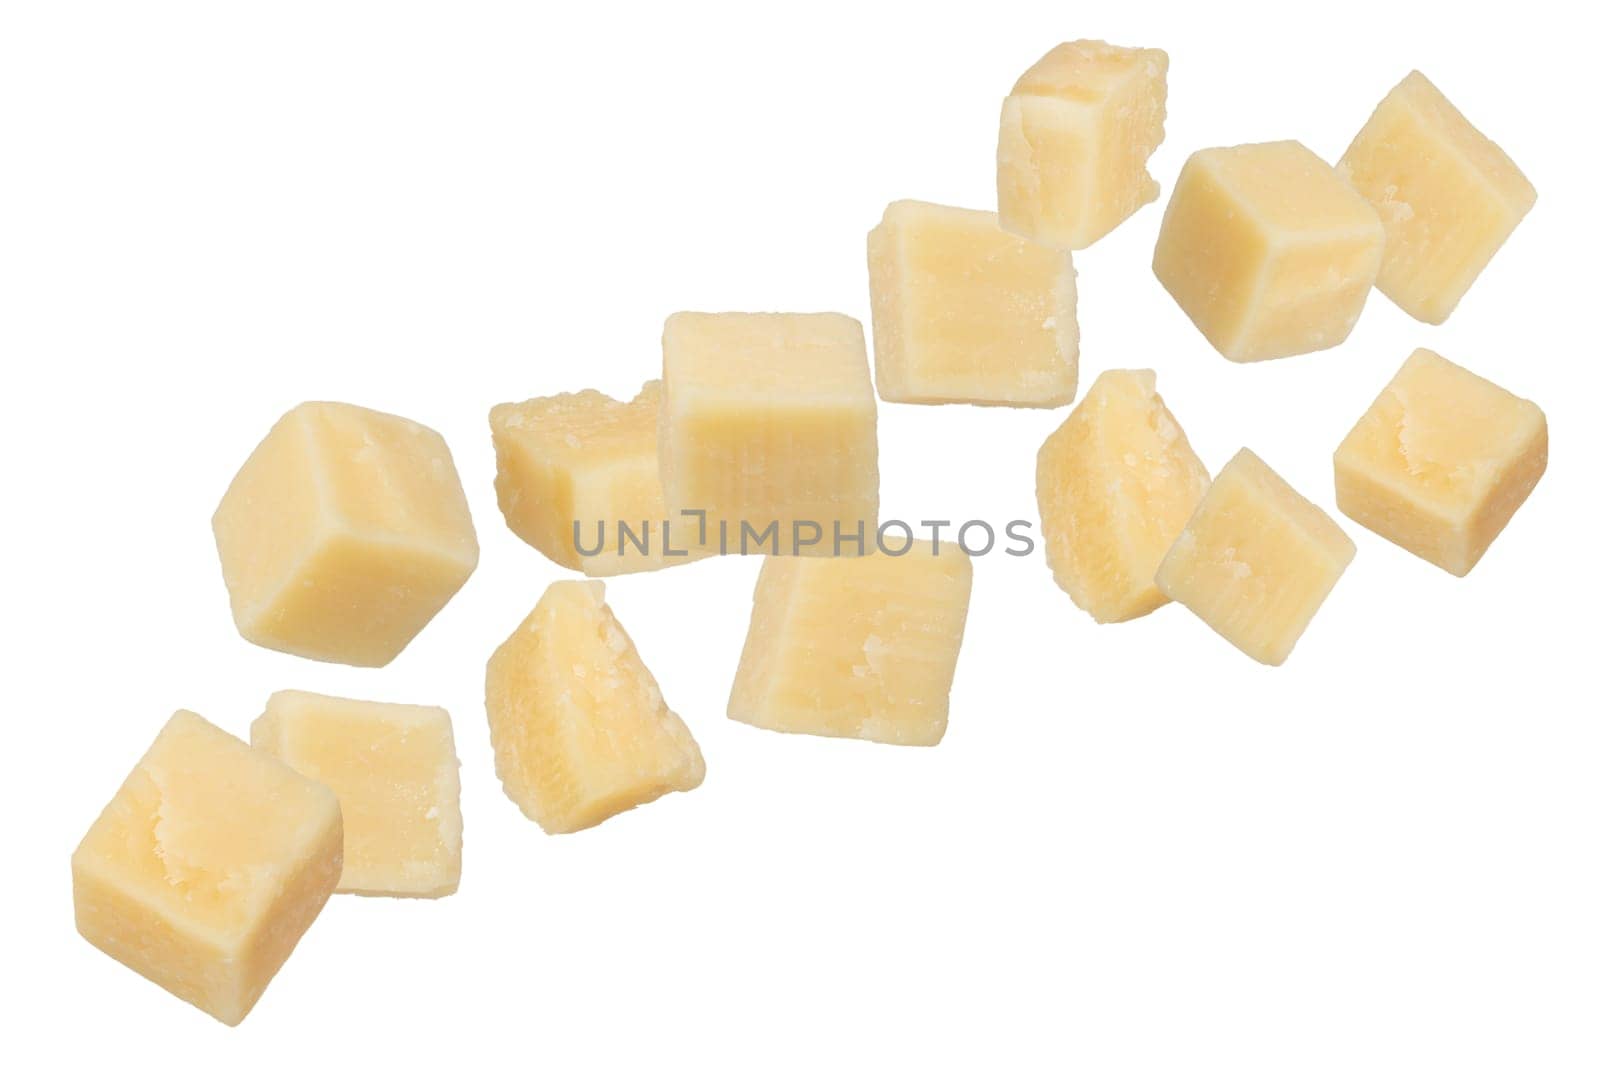 Pieces of hard parmesan cheese isolated on white background. Pieces of square-shaped parmesan on a white background, close-up. Italian variety of hard cheese, long maturation. by SERSOL